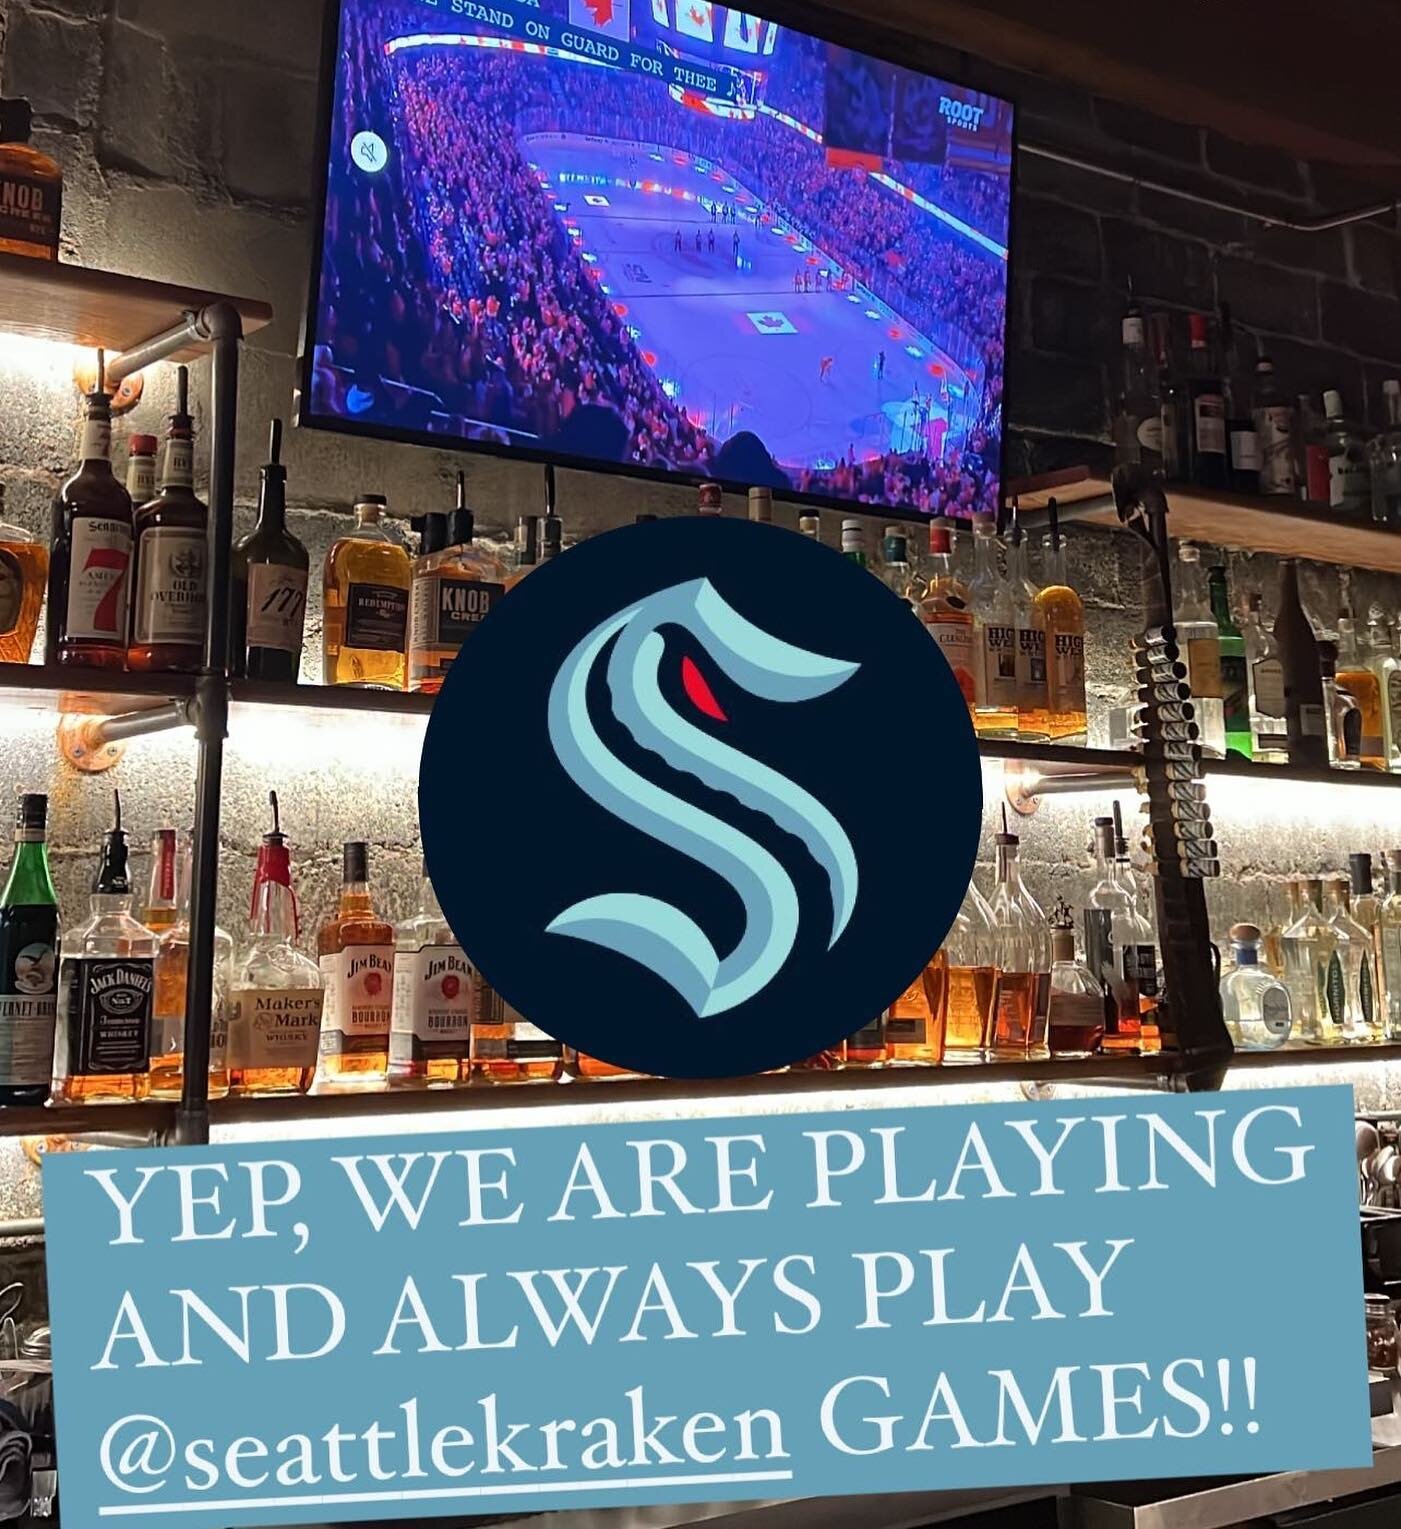 You better believe we are watching the Kraken game! Come join the fun with pizza and beer!